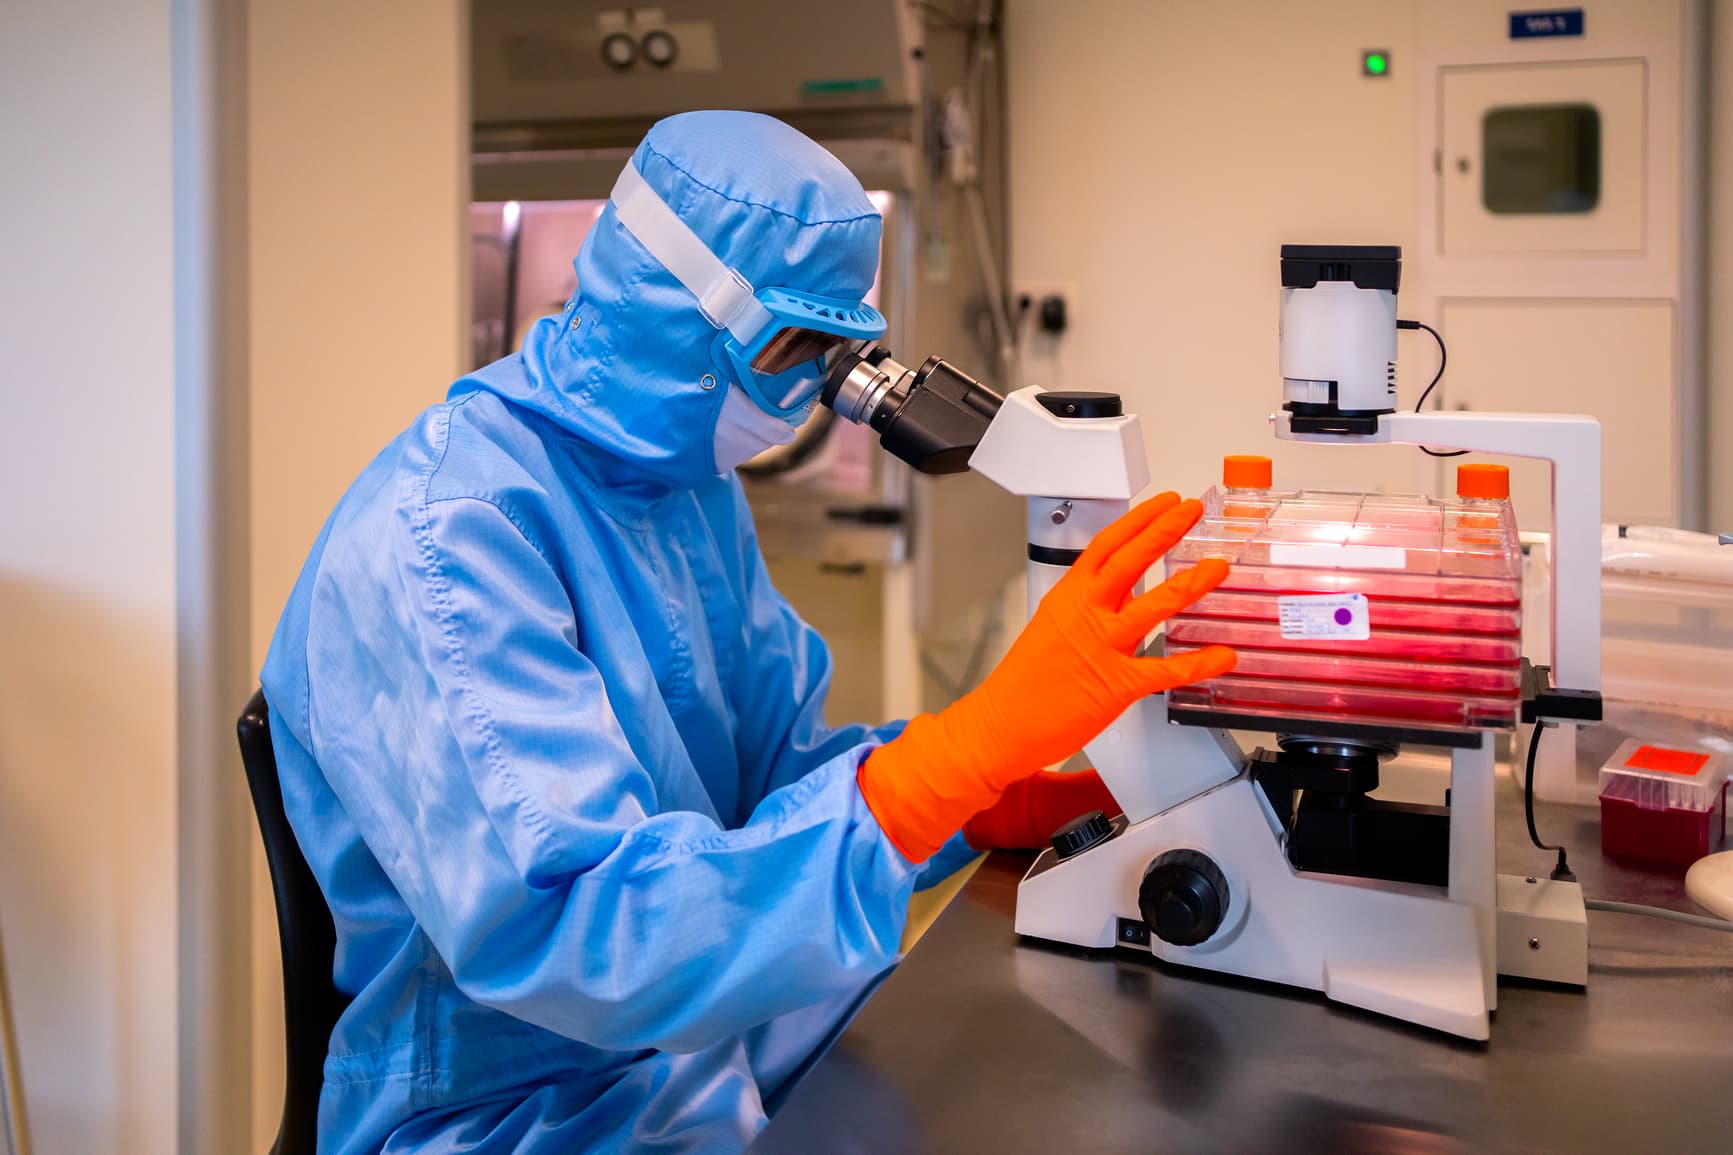 A lab technician looking through a microscope in a blue PPE suit, and bright orange gloves.